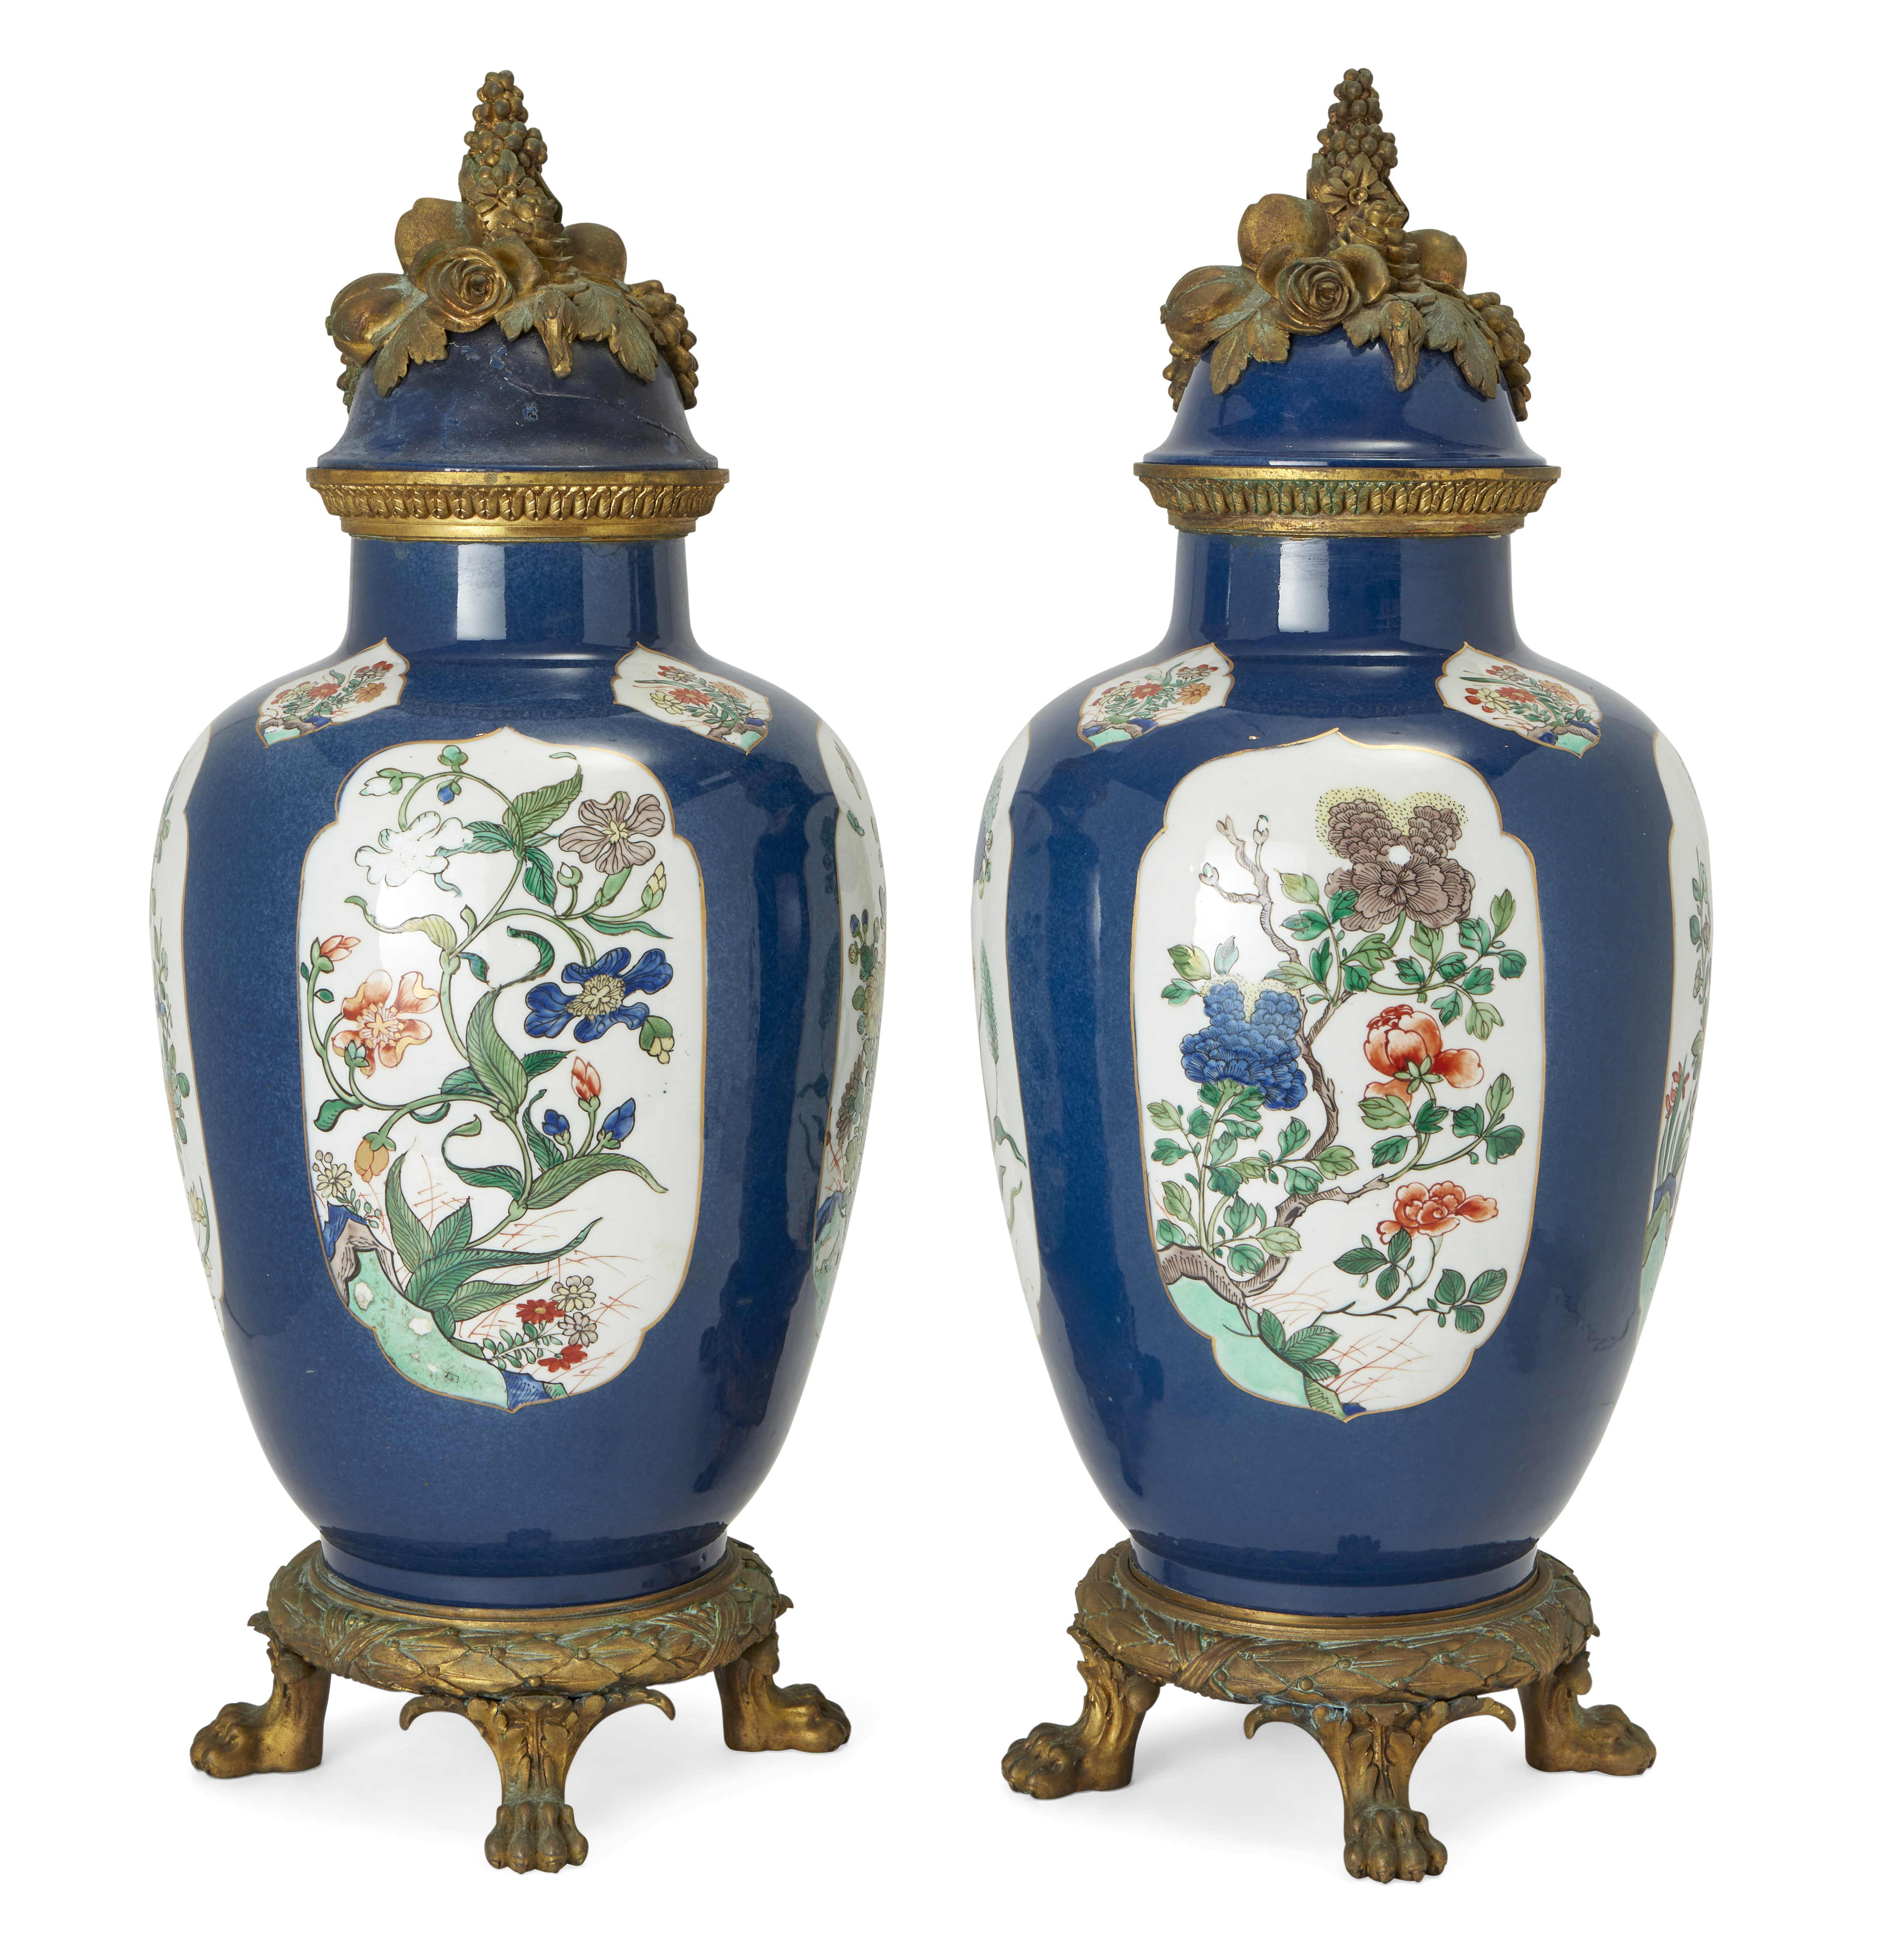 A pair of French Samson powder-blue ground famille verte jars and covers